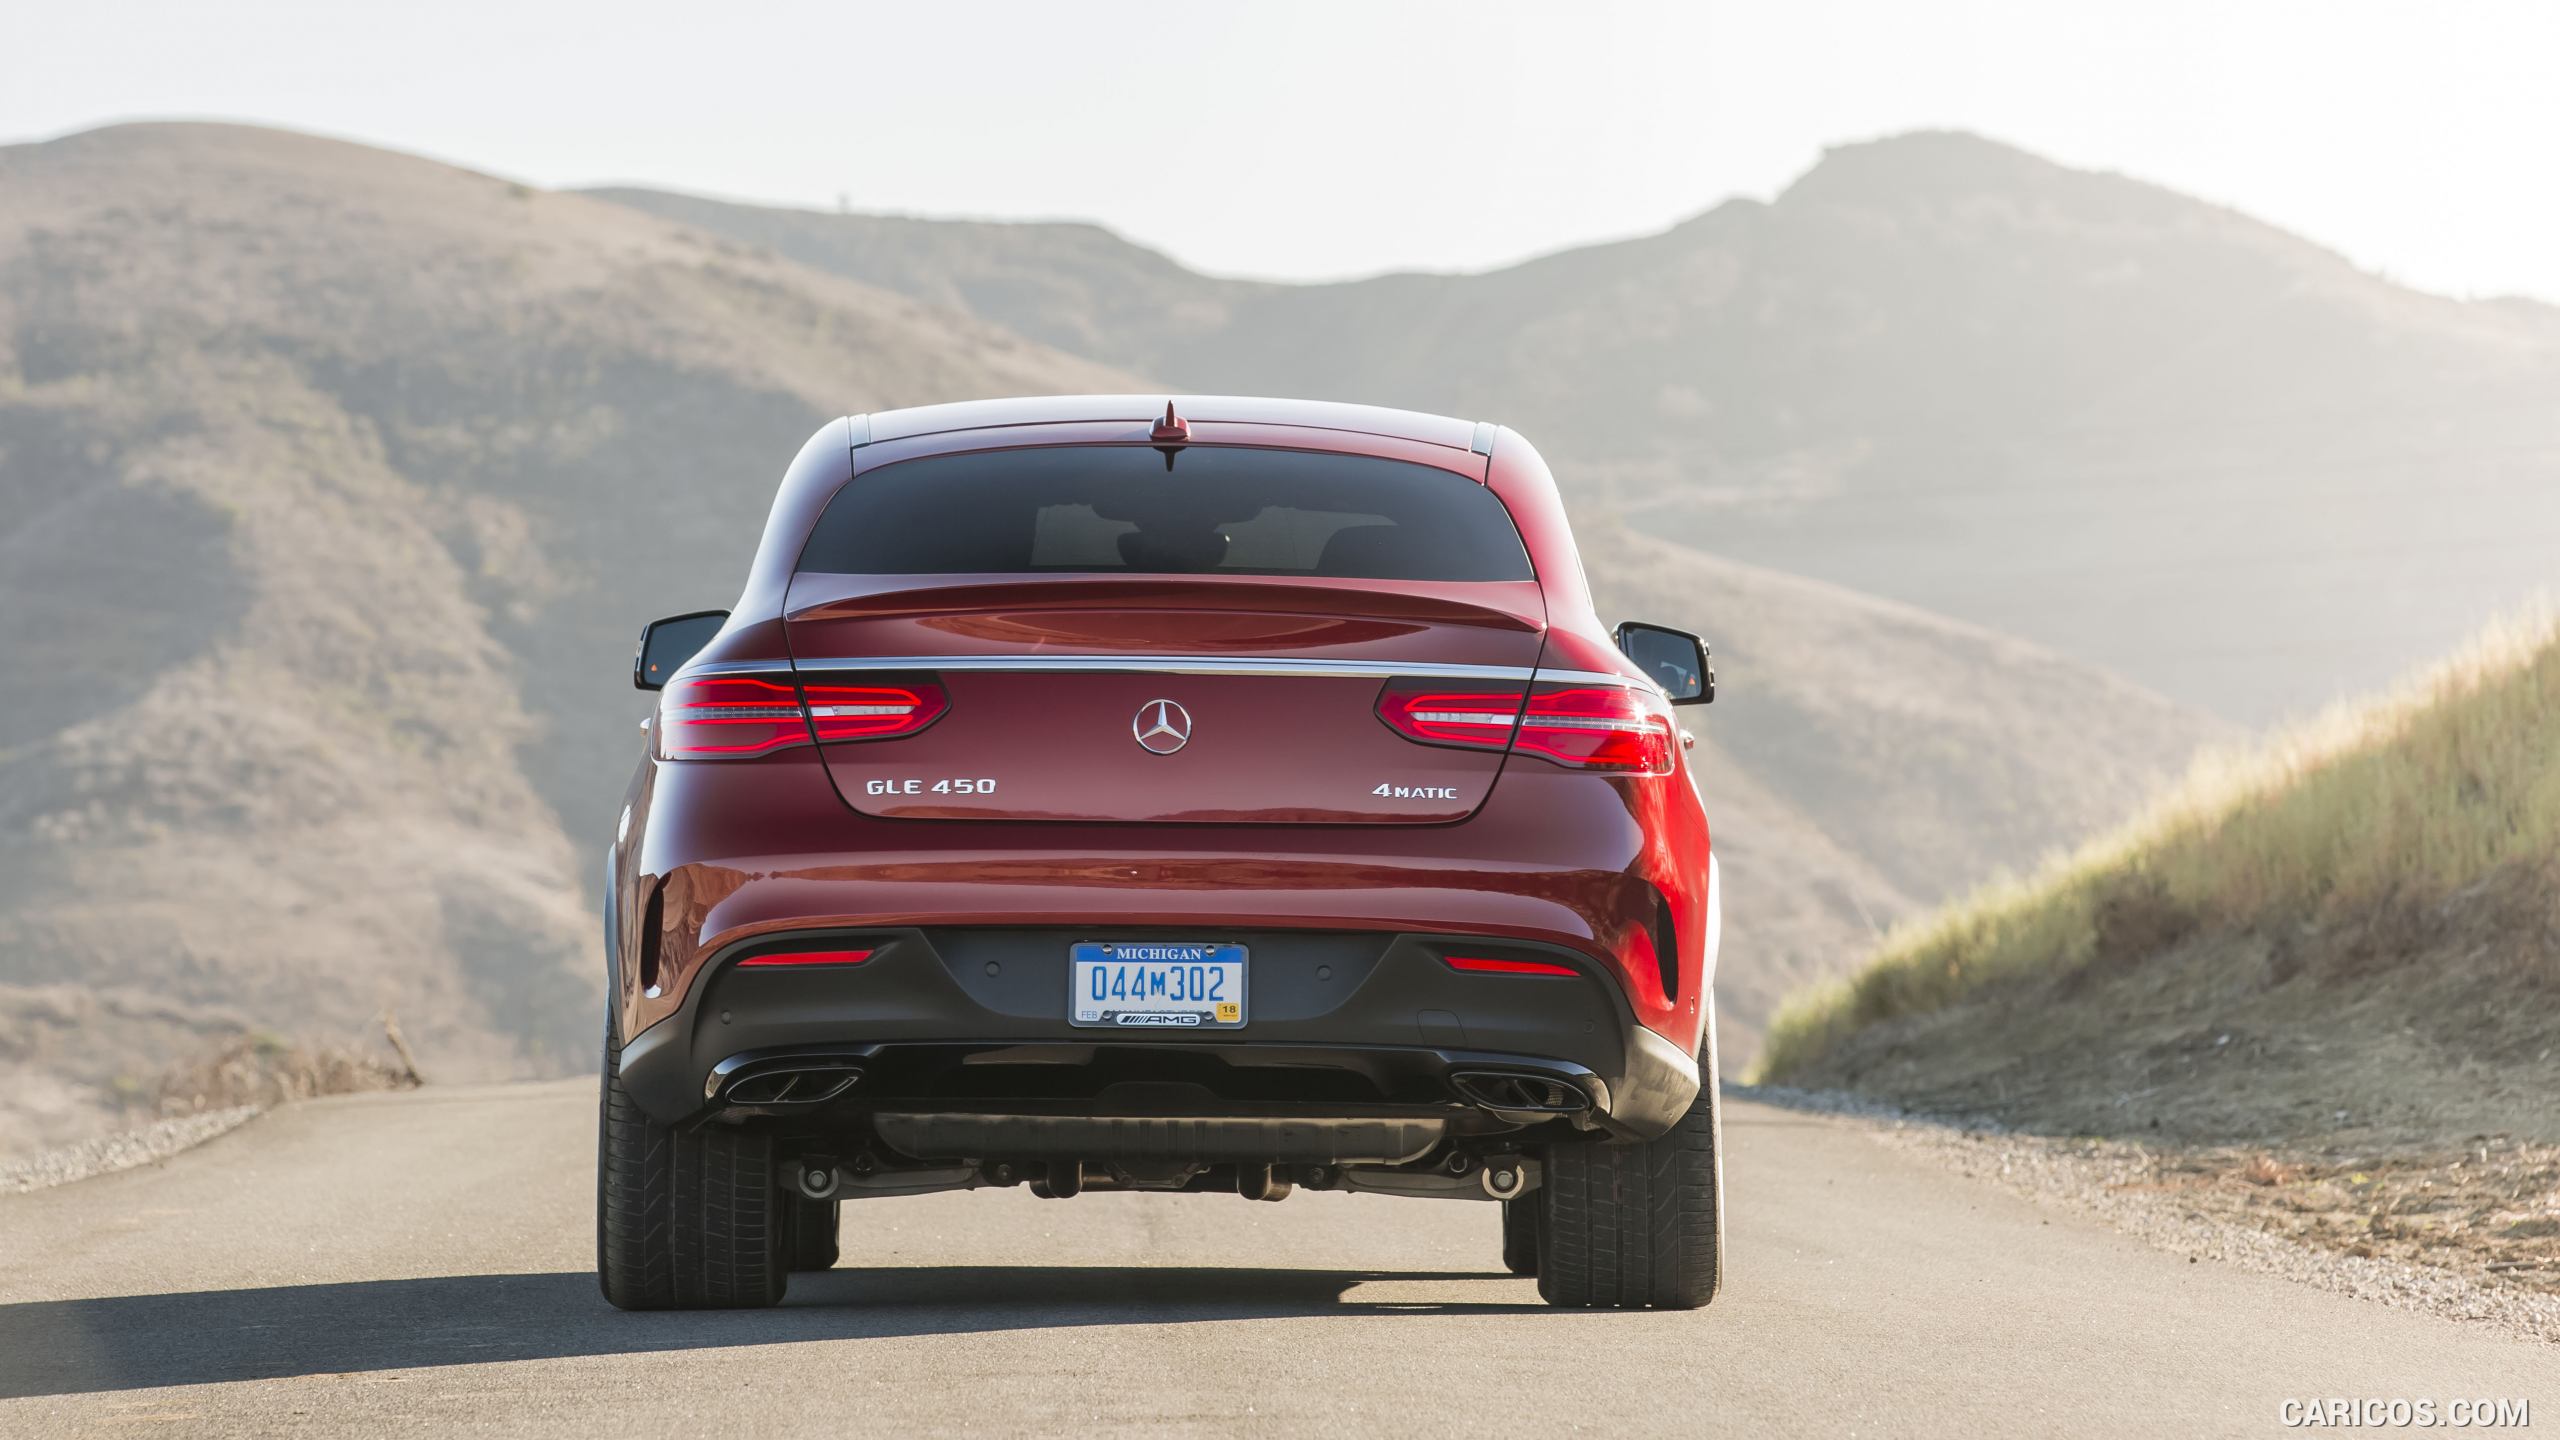 2016 Mercedes-Benz GLE 450 AMG Coupe 4MATIC (US-Spec) - Rear, #38 of 115